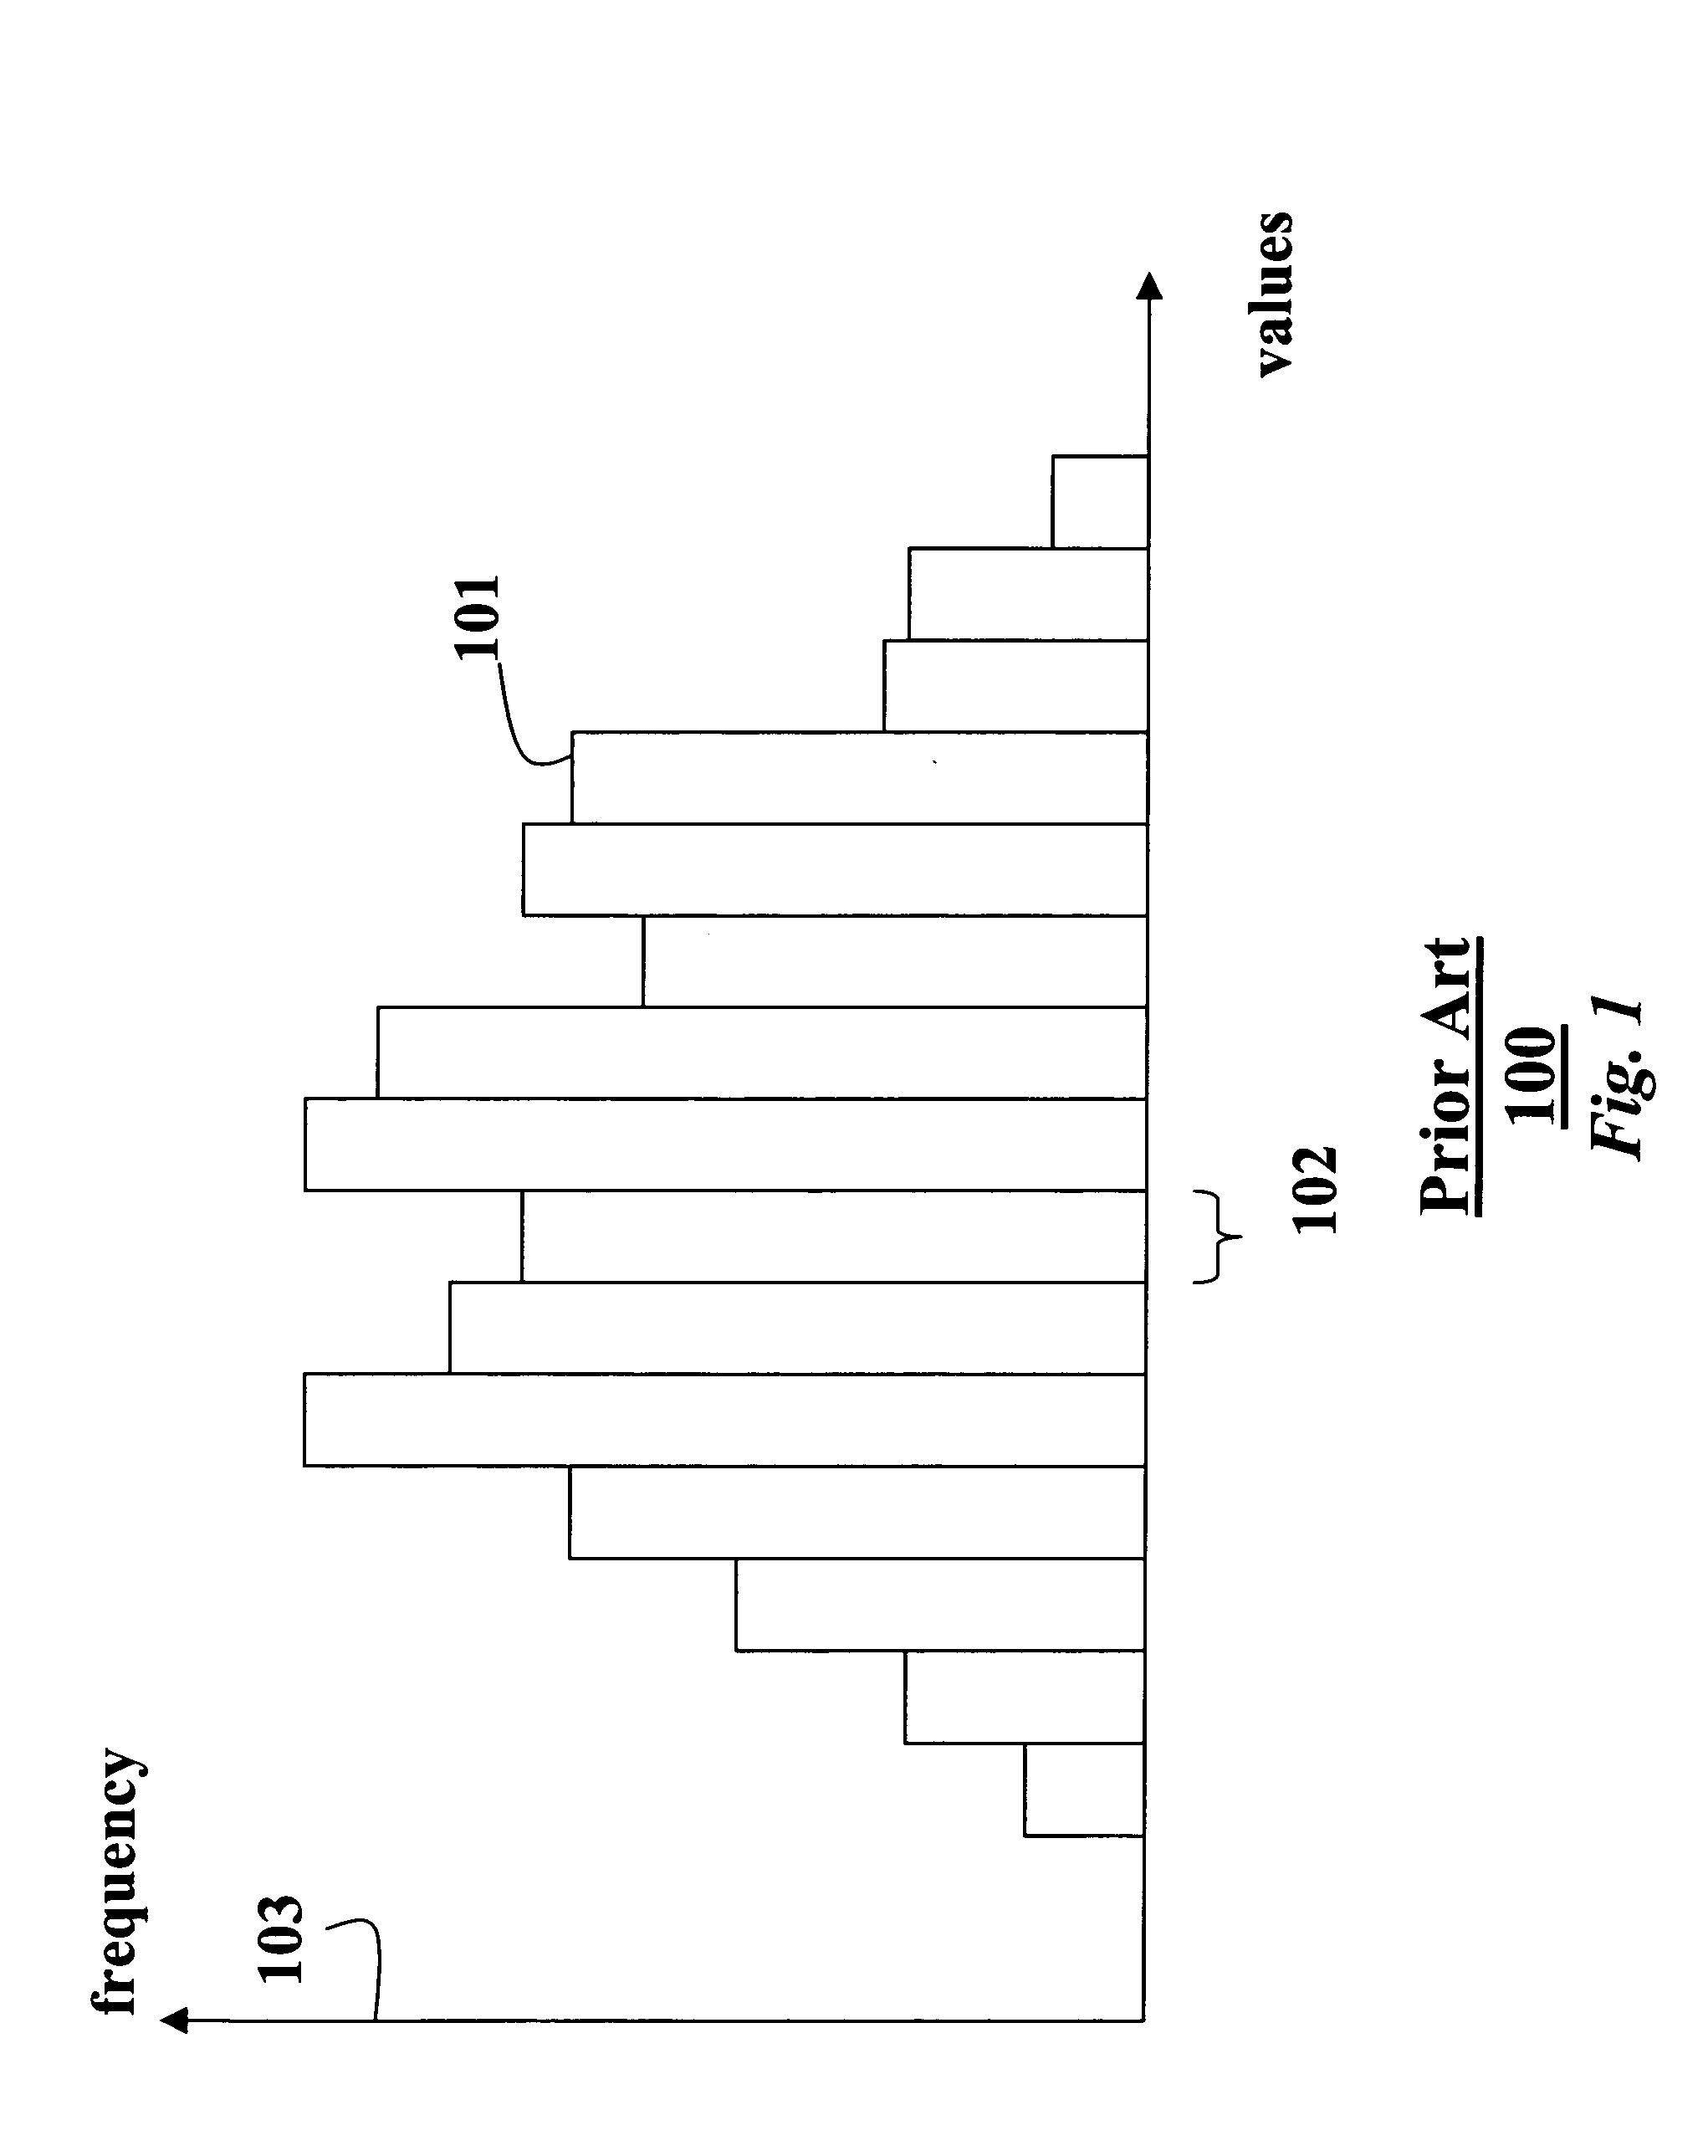 Method of extracting and searching integral histograms of data samples